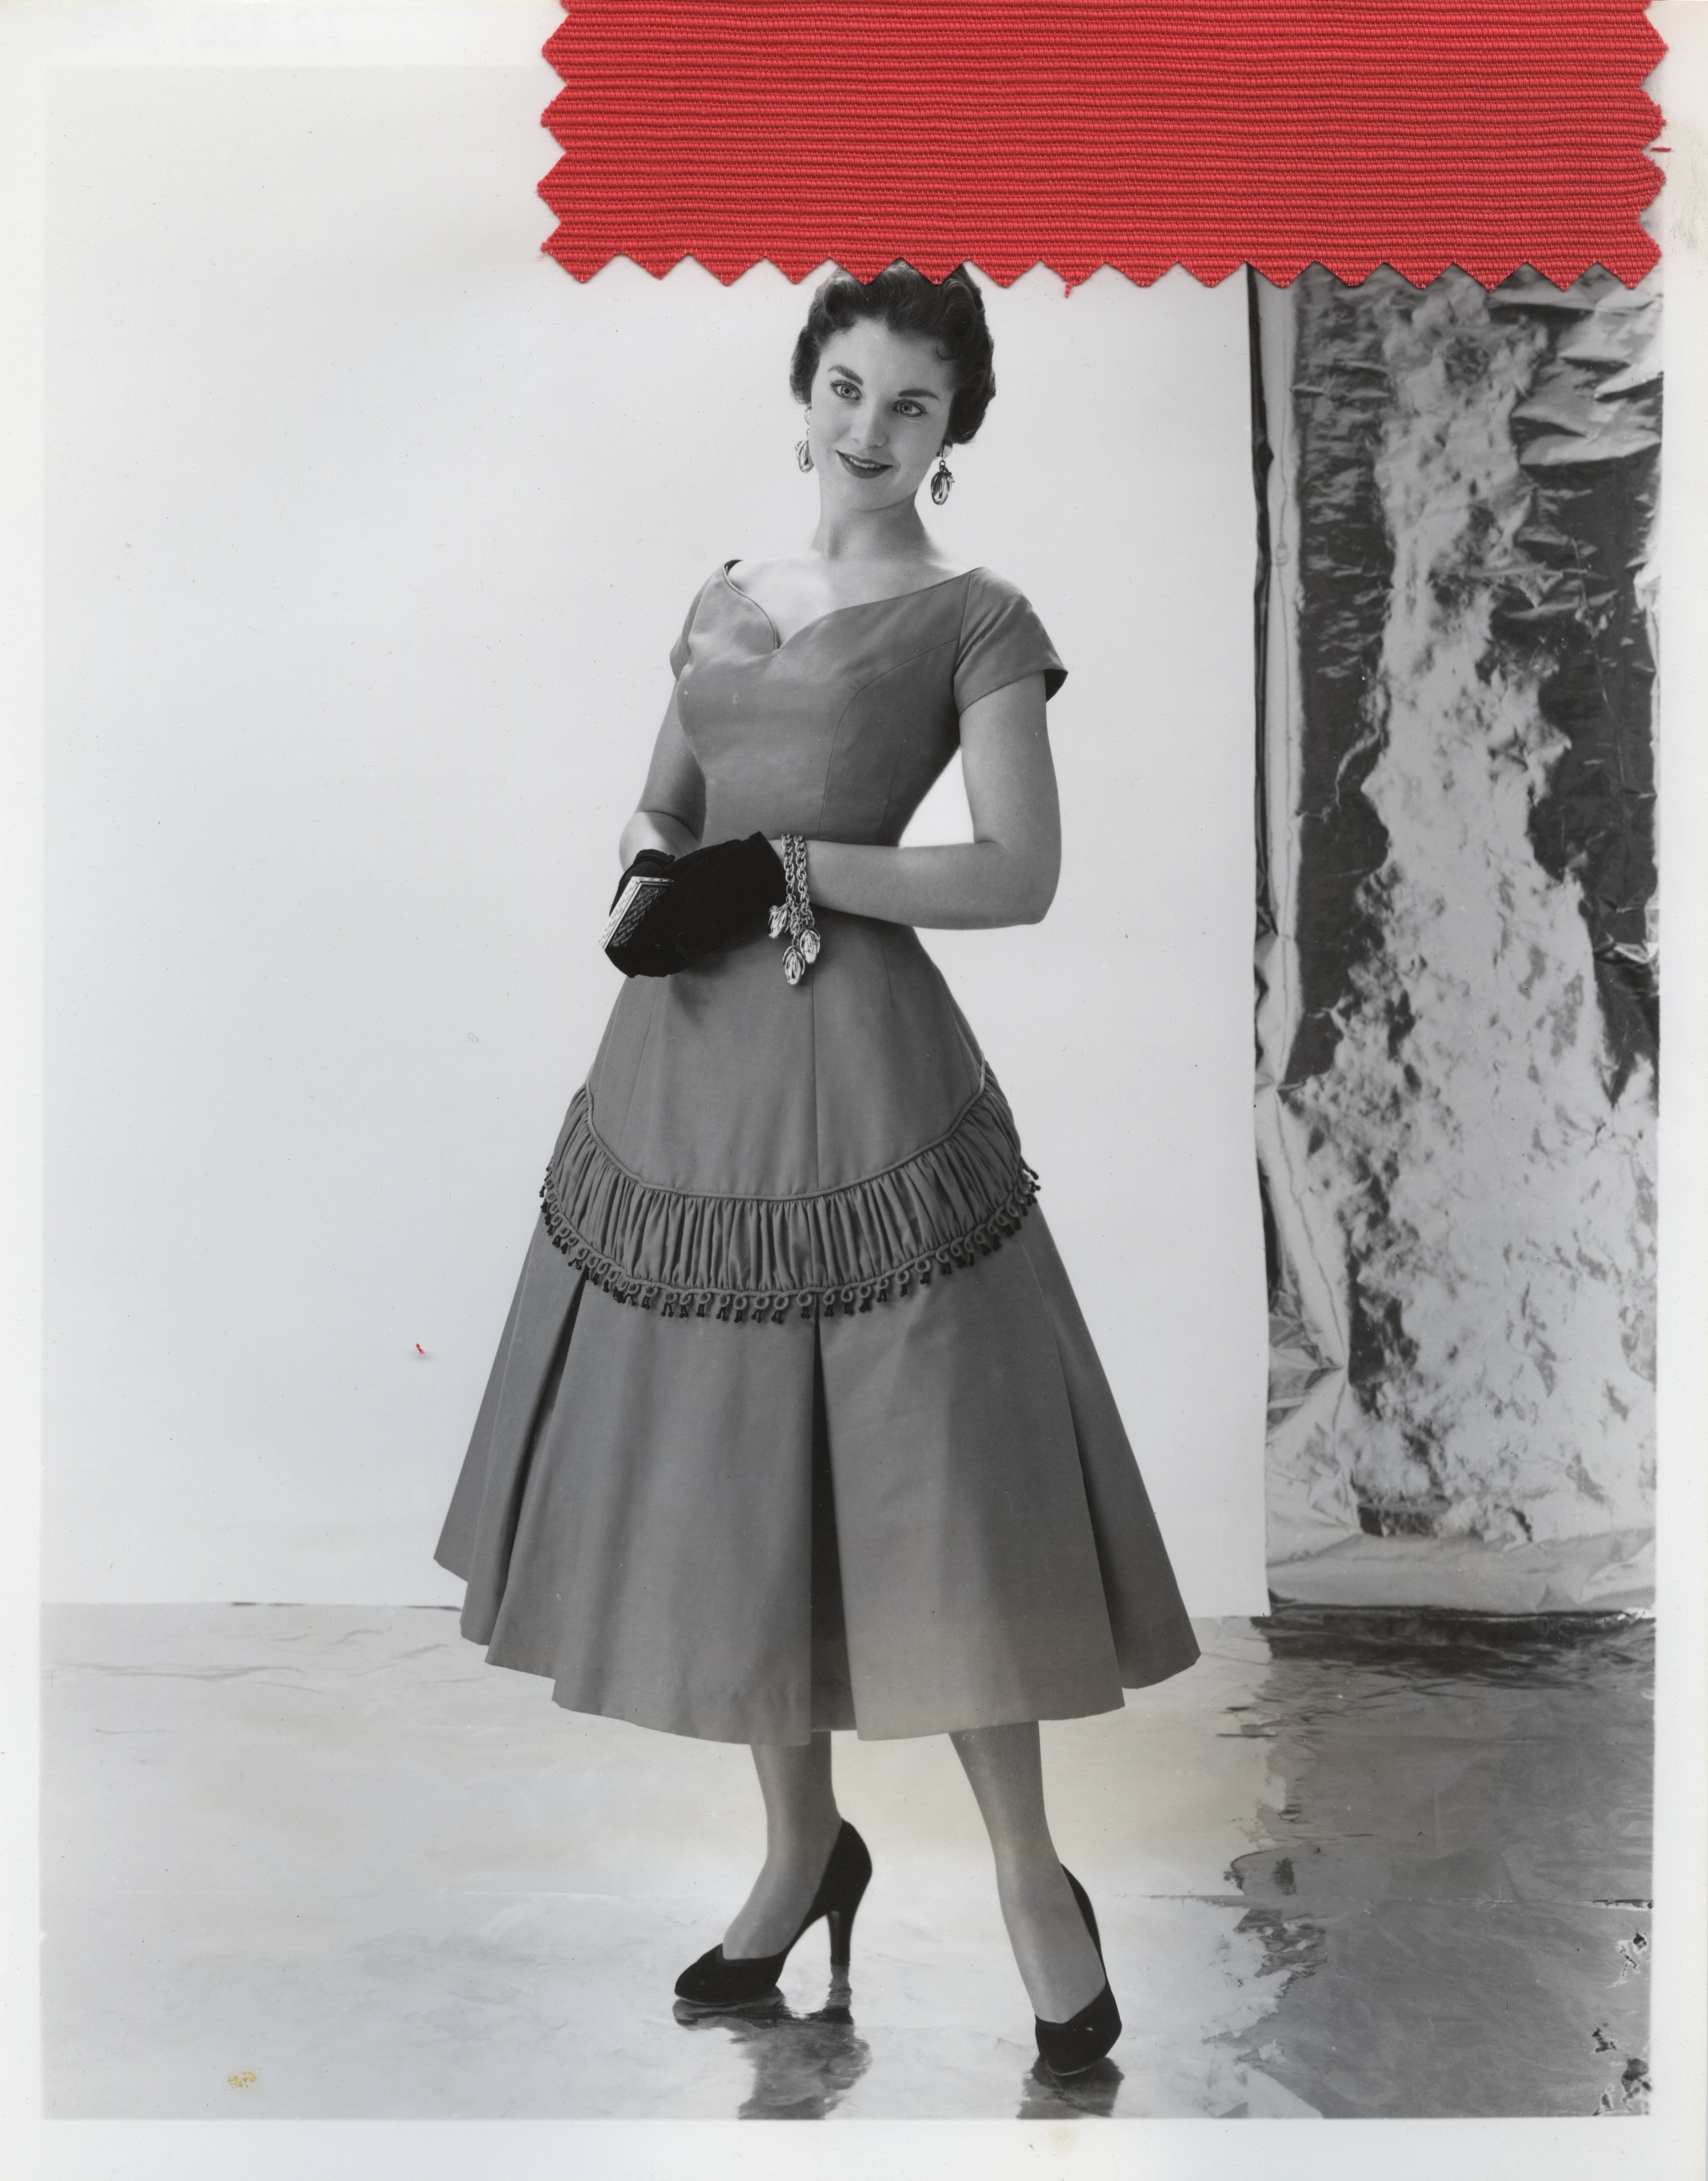 Black and white photograph of a woman in a calf-length cocktail dress, with a red fabric sample